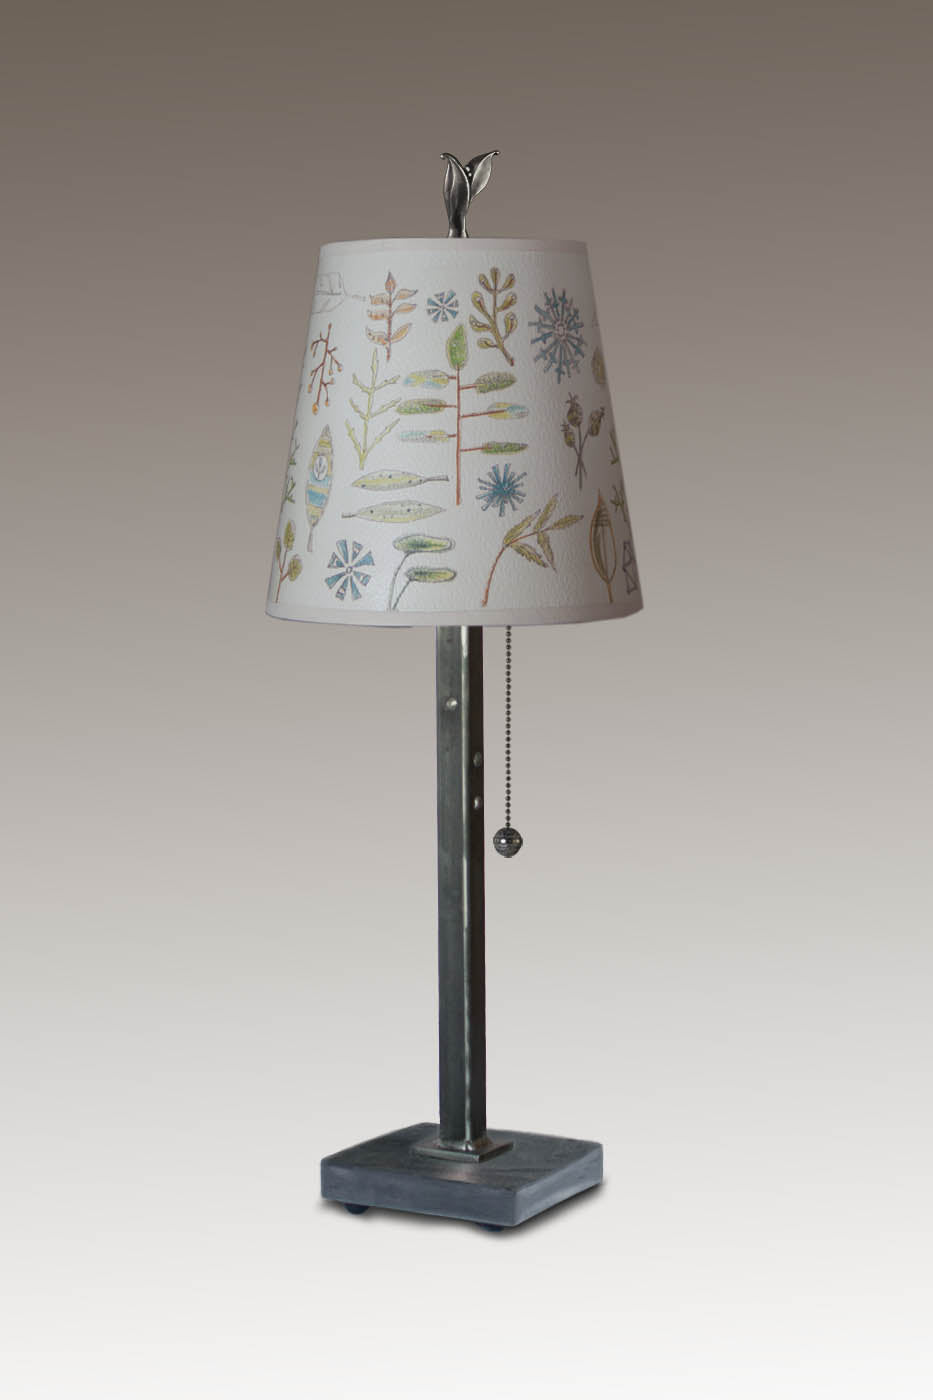 Janna Ugone &amp; Co Table Lamp Steel Table Lamp with Small Drum Shade in Field Chart